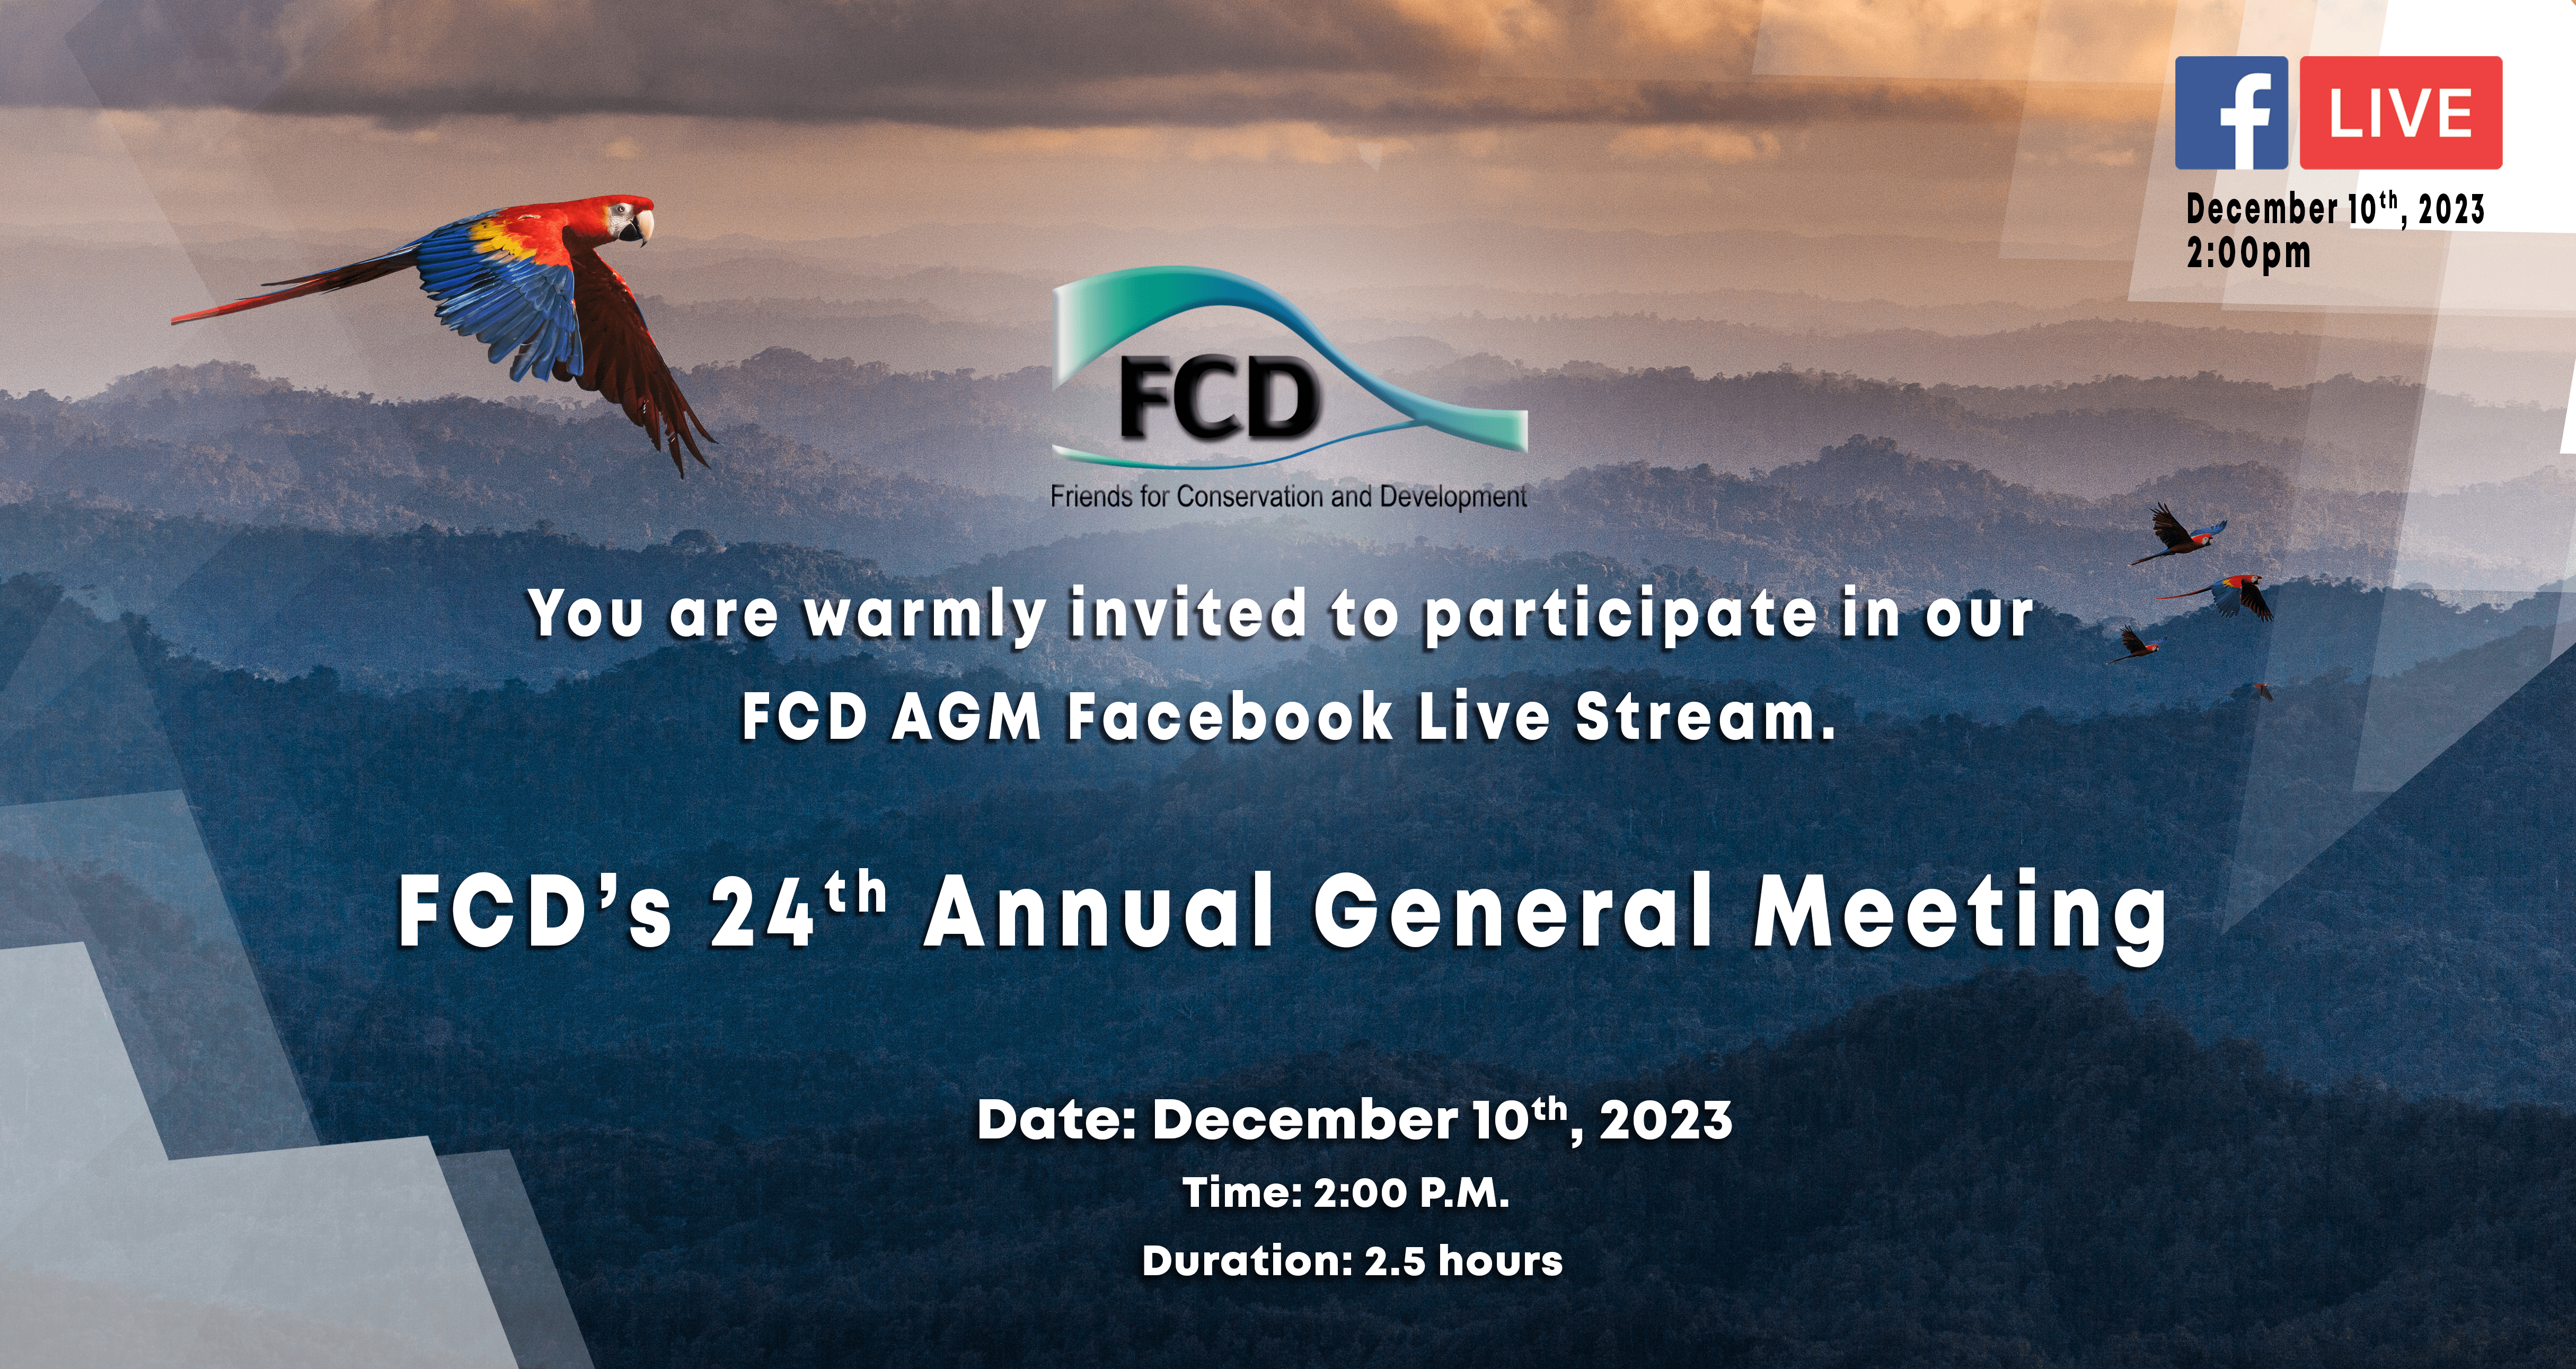 FCD’s 24th Annual General Meeting is set for December 10th, 2023.